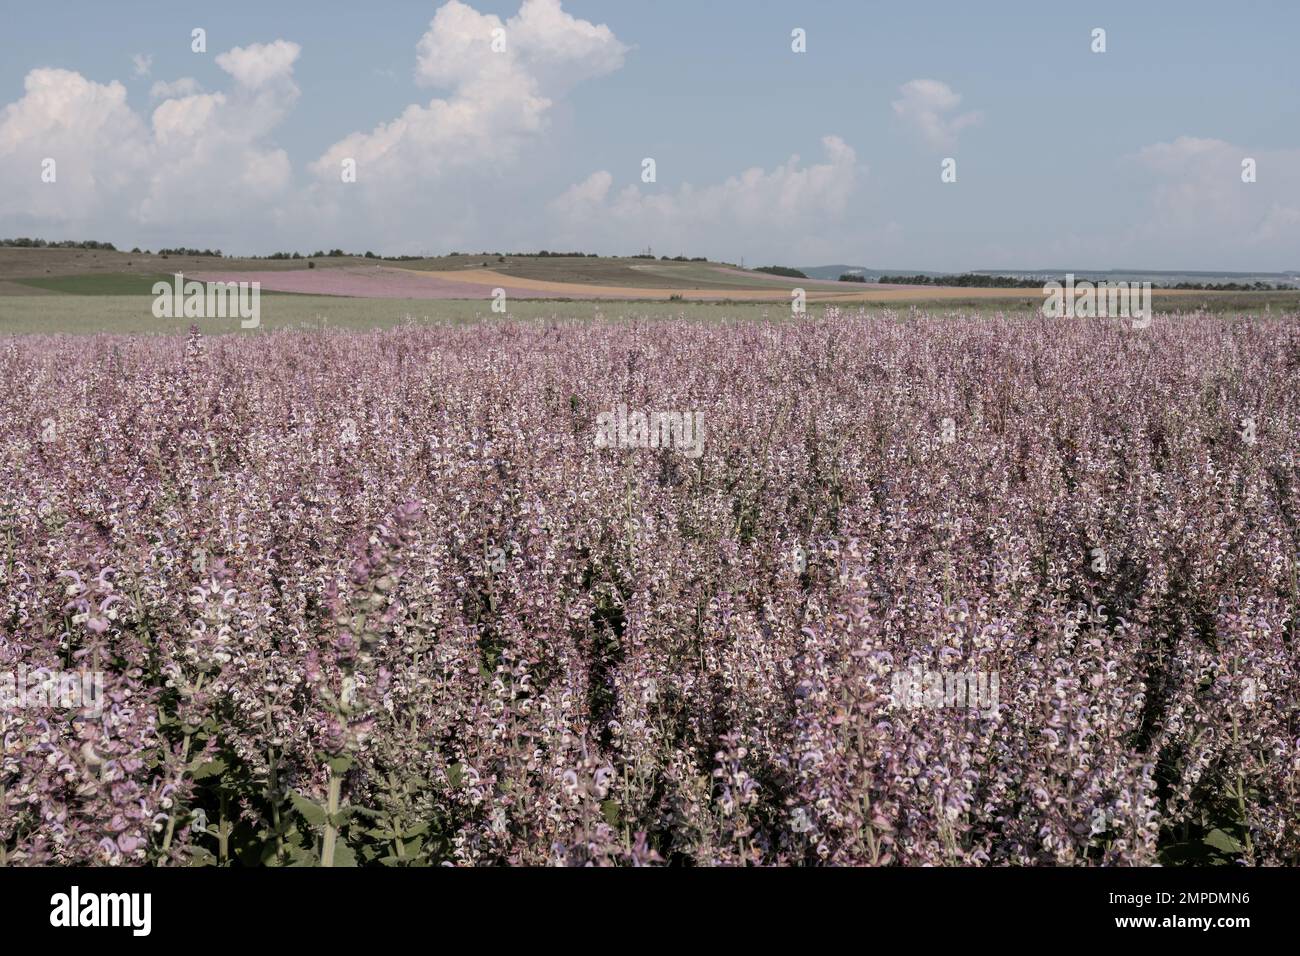 Field of Clary sage - Salvia Sclarea in bloom, cultivated to extract the essential oil and honey. Field with blossom sage plants during golden sunset Stock Photo